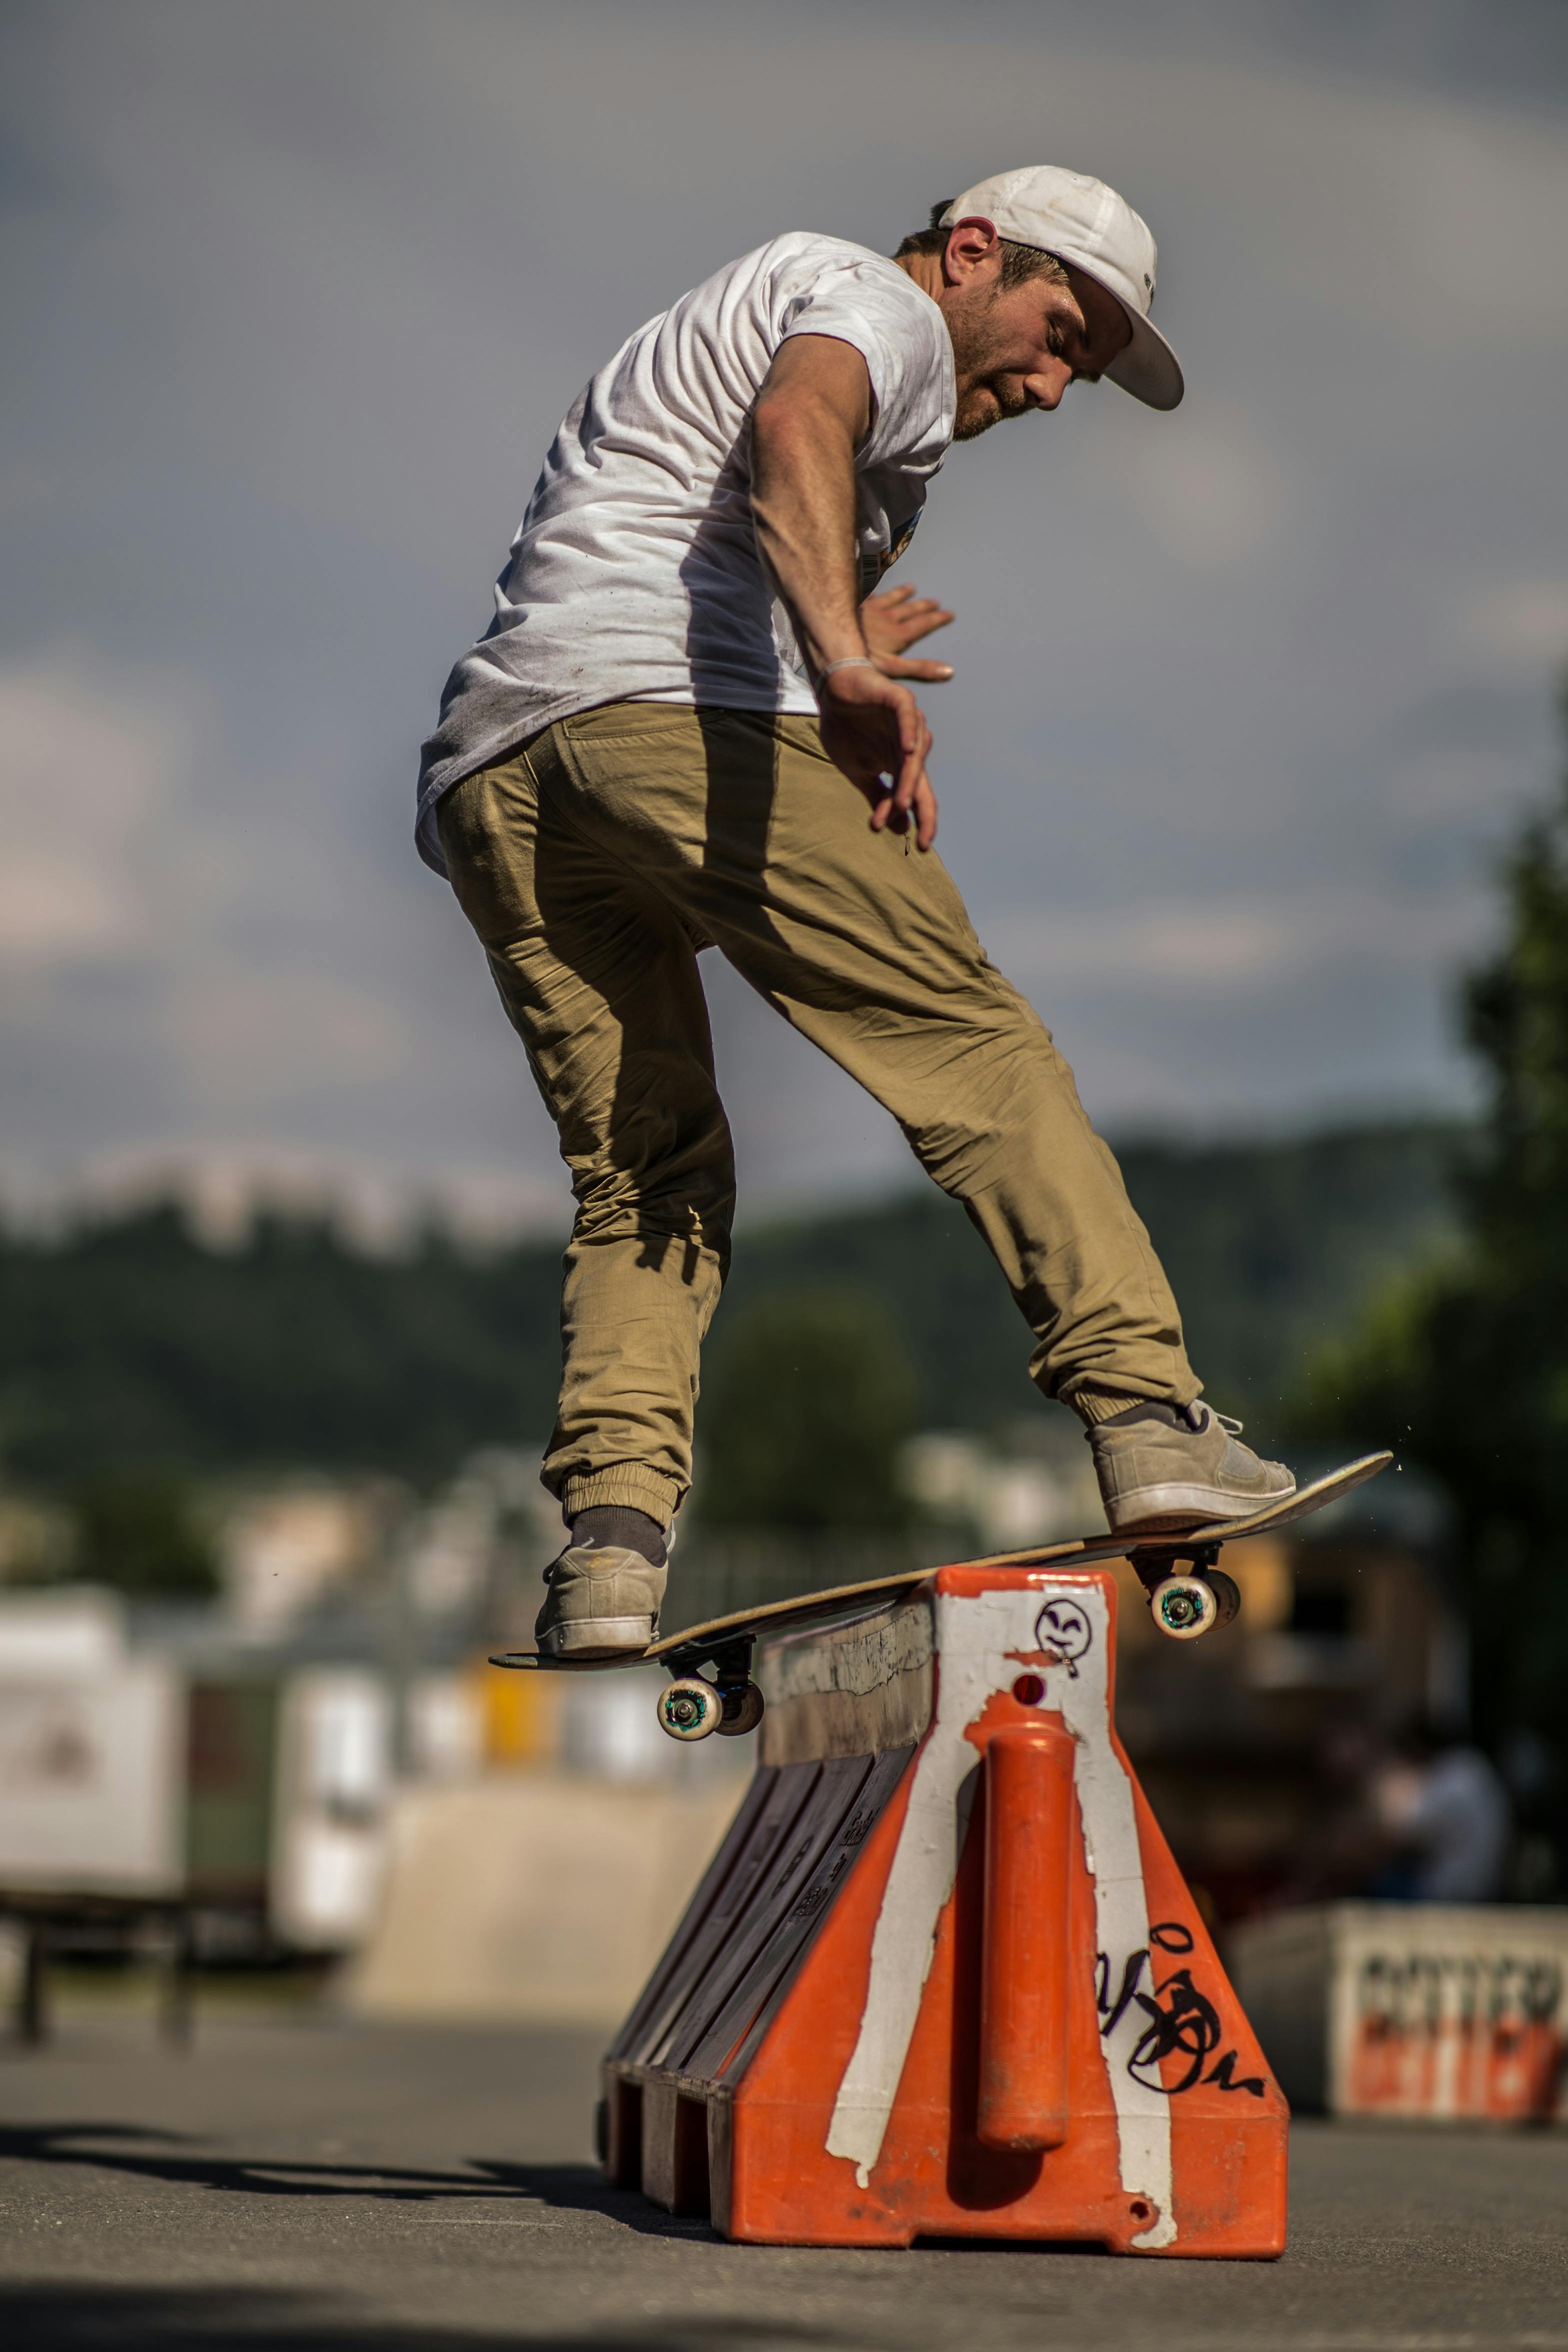 person doing trick on skateboard